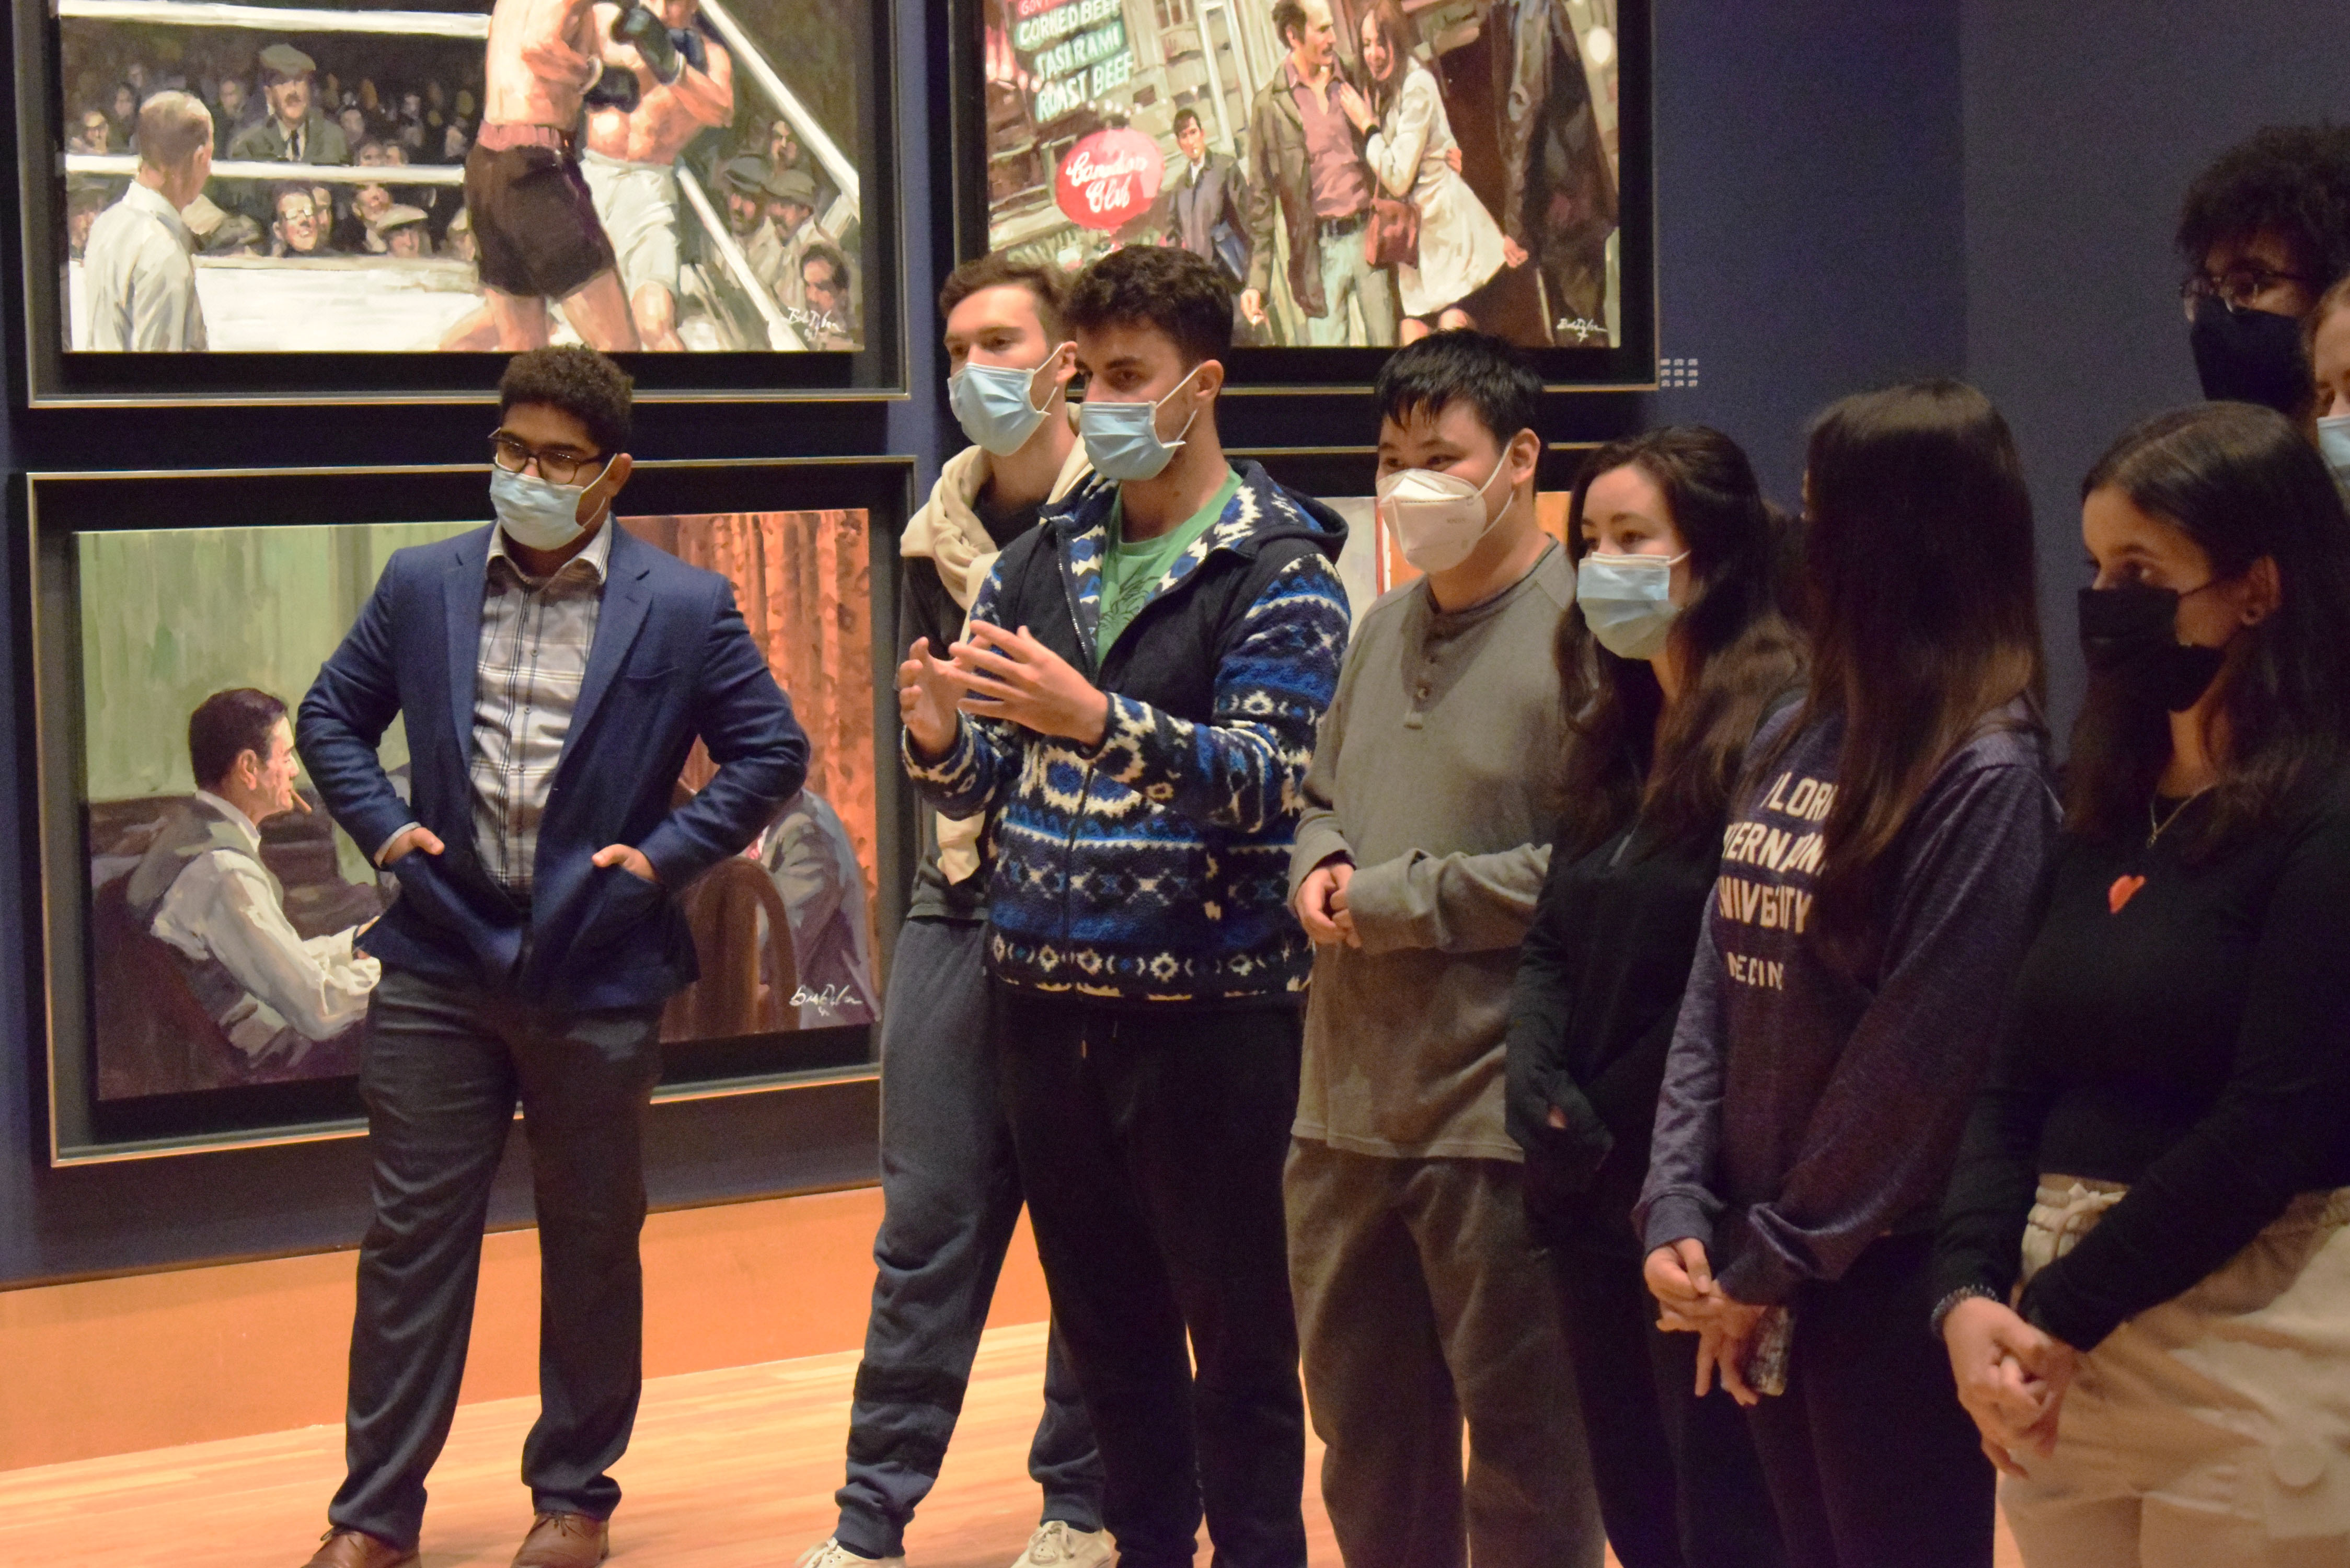 Medical students tour the Frost Art Museum